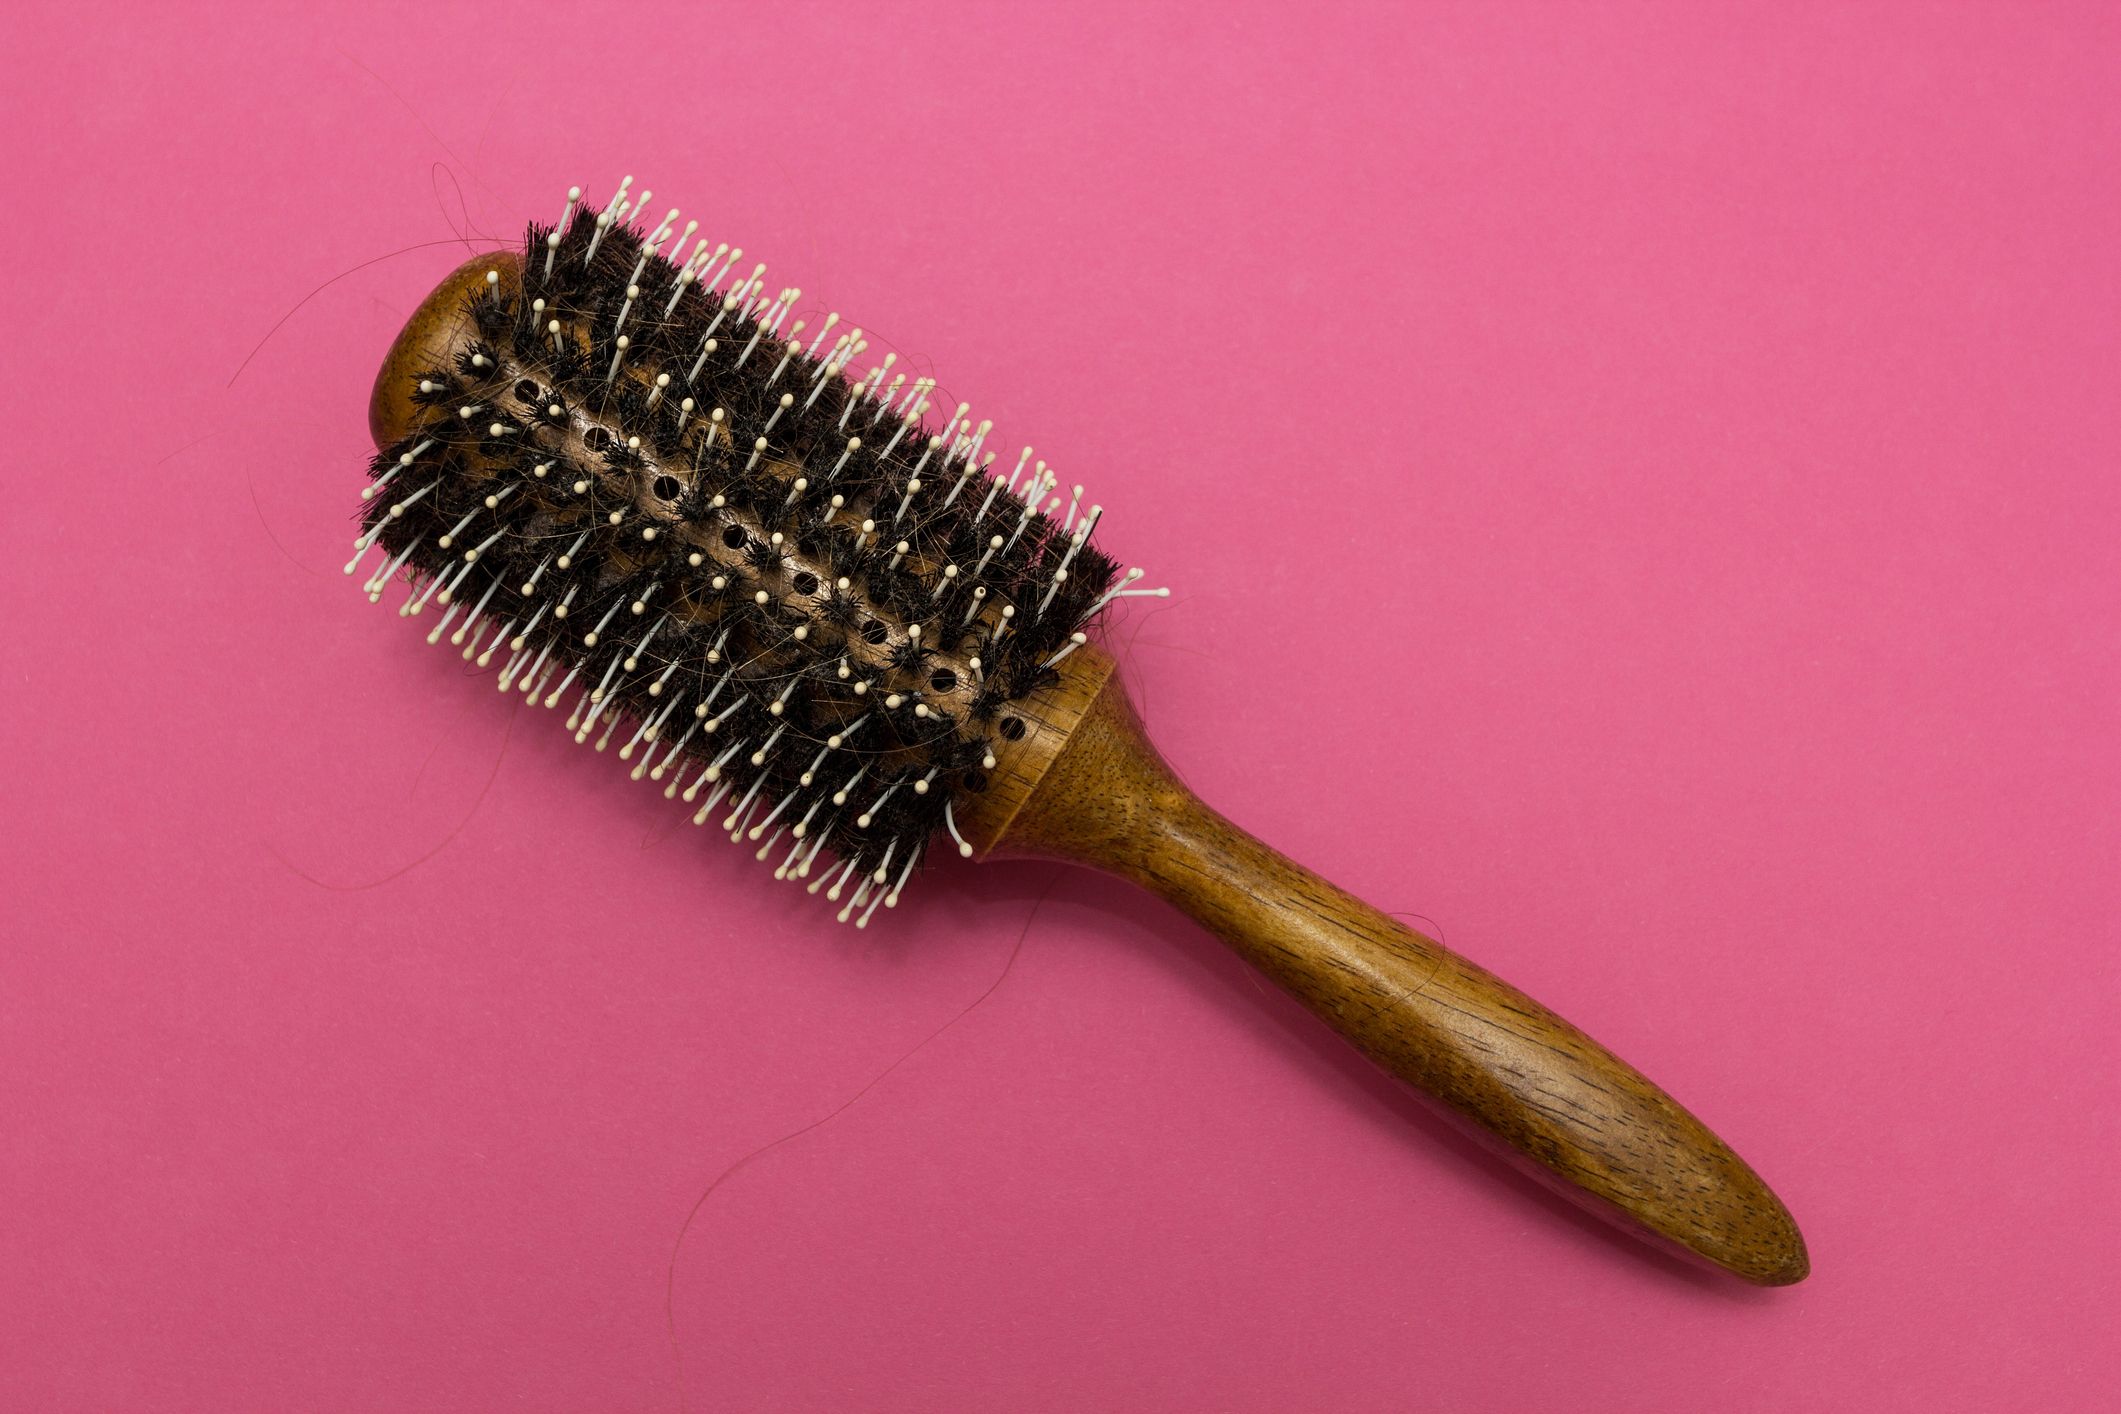 How to Clean Your Comb, Hair Brush Cleaning Tips